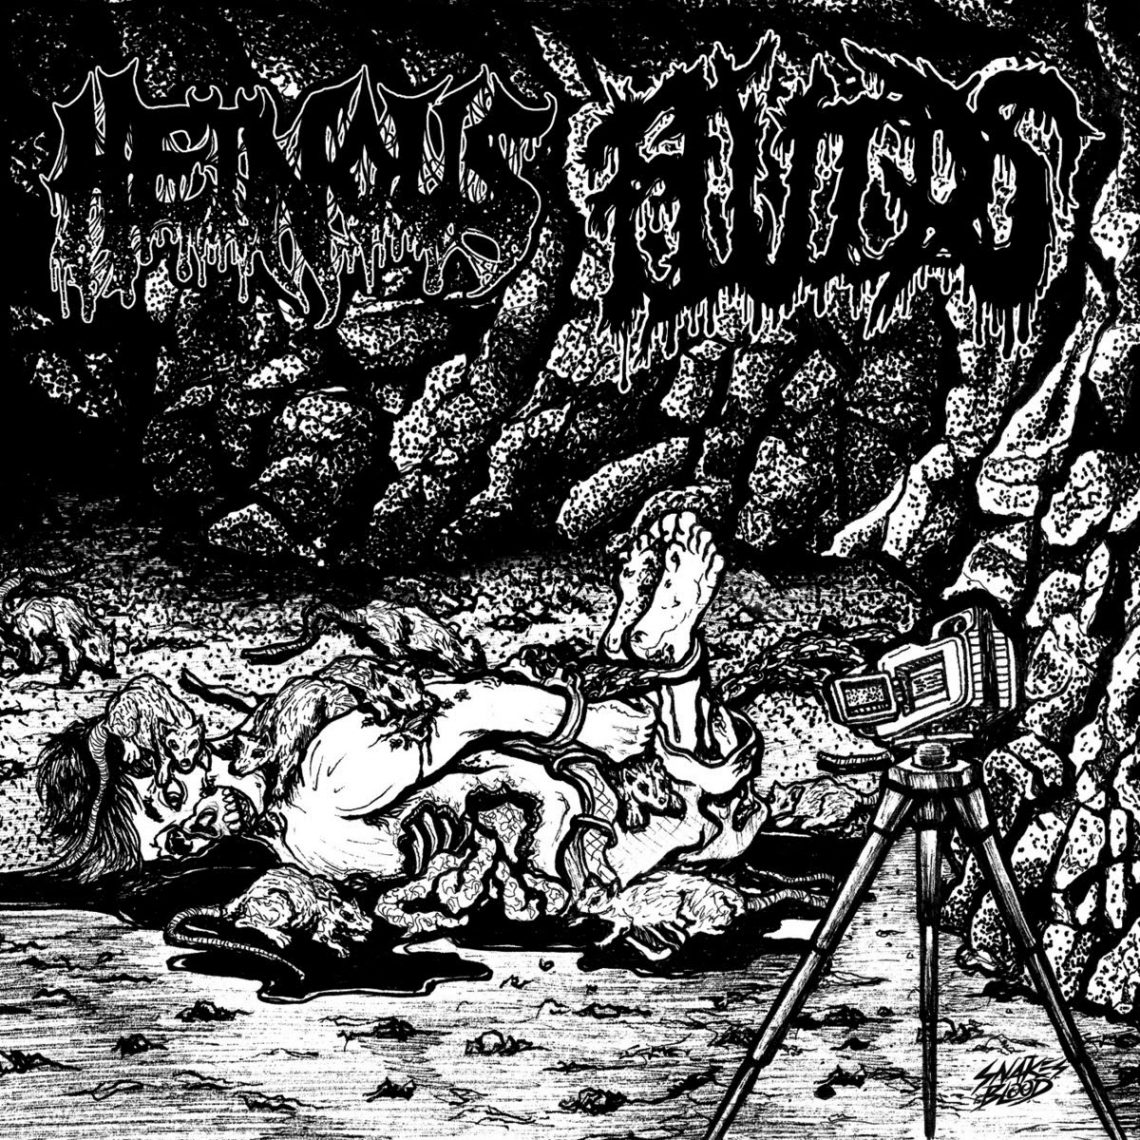 HEINOUS to release split with FLUIDS on Horror Pain Gore Death Productions; “Snuffed / Torture Euphoric” set for release on May 29th